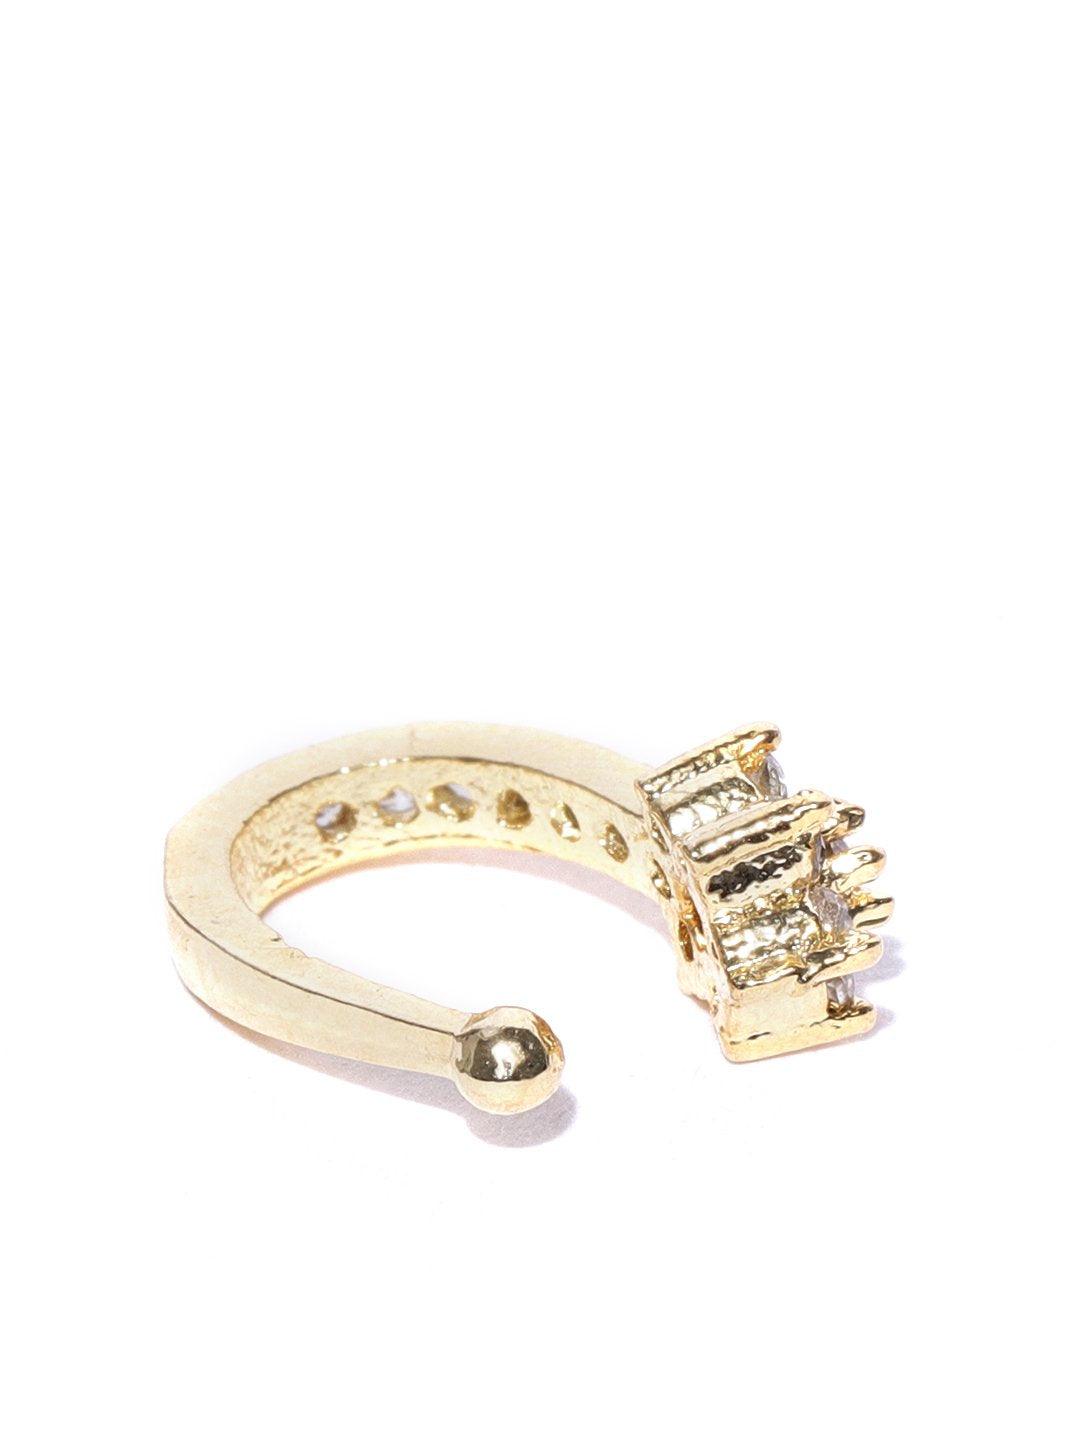 Women's Classic Gold-Plated & White CZ Studded Clip-On Nosepin For Women And Girls - Priyaasi - Indiakreations